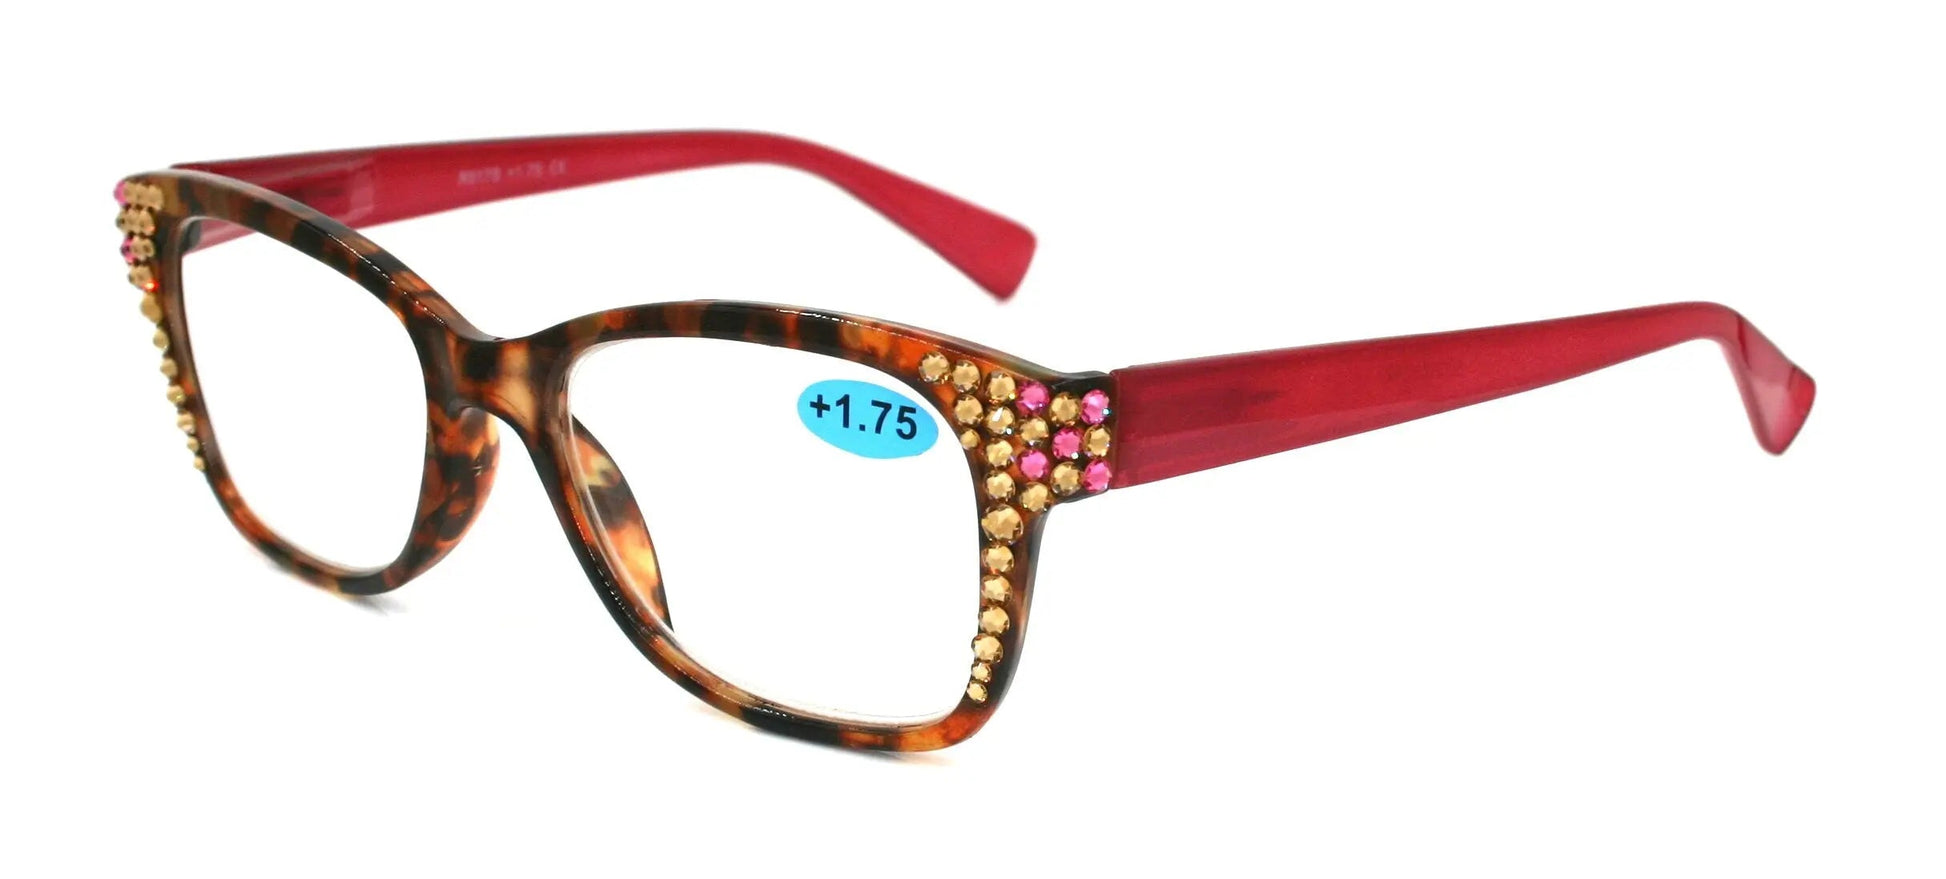 Madison Square, (Bling) Reading Glasses 4 Women W L. Colorado,)Genuine European Crystals +1.5.+3 (Pink Brown) NY Fifth Avenue (Wide frame)